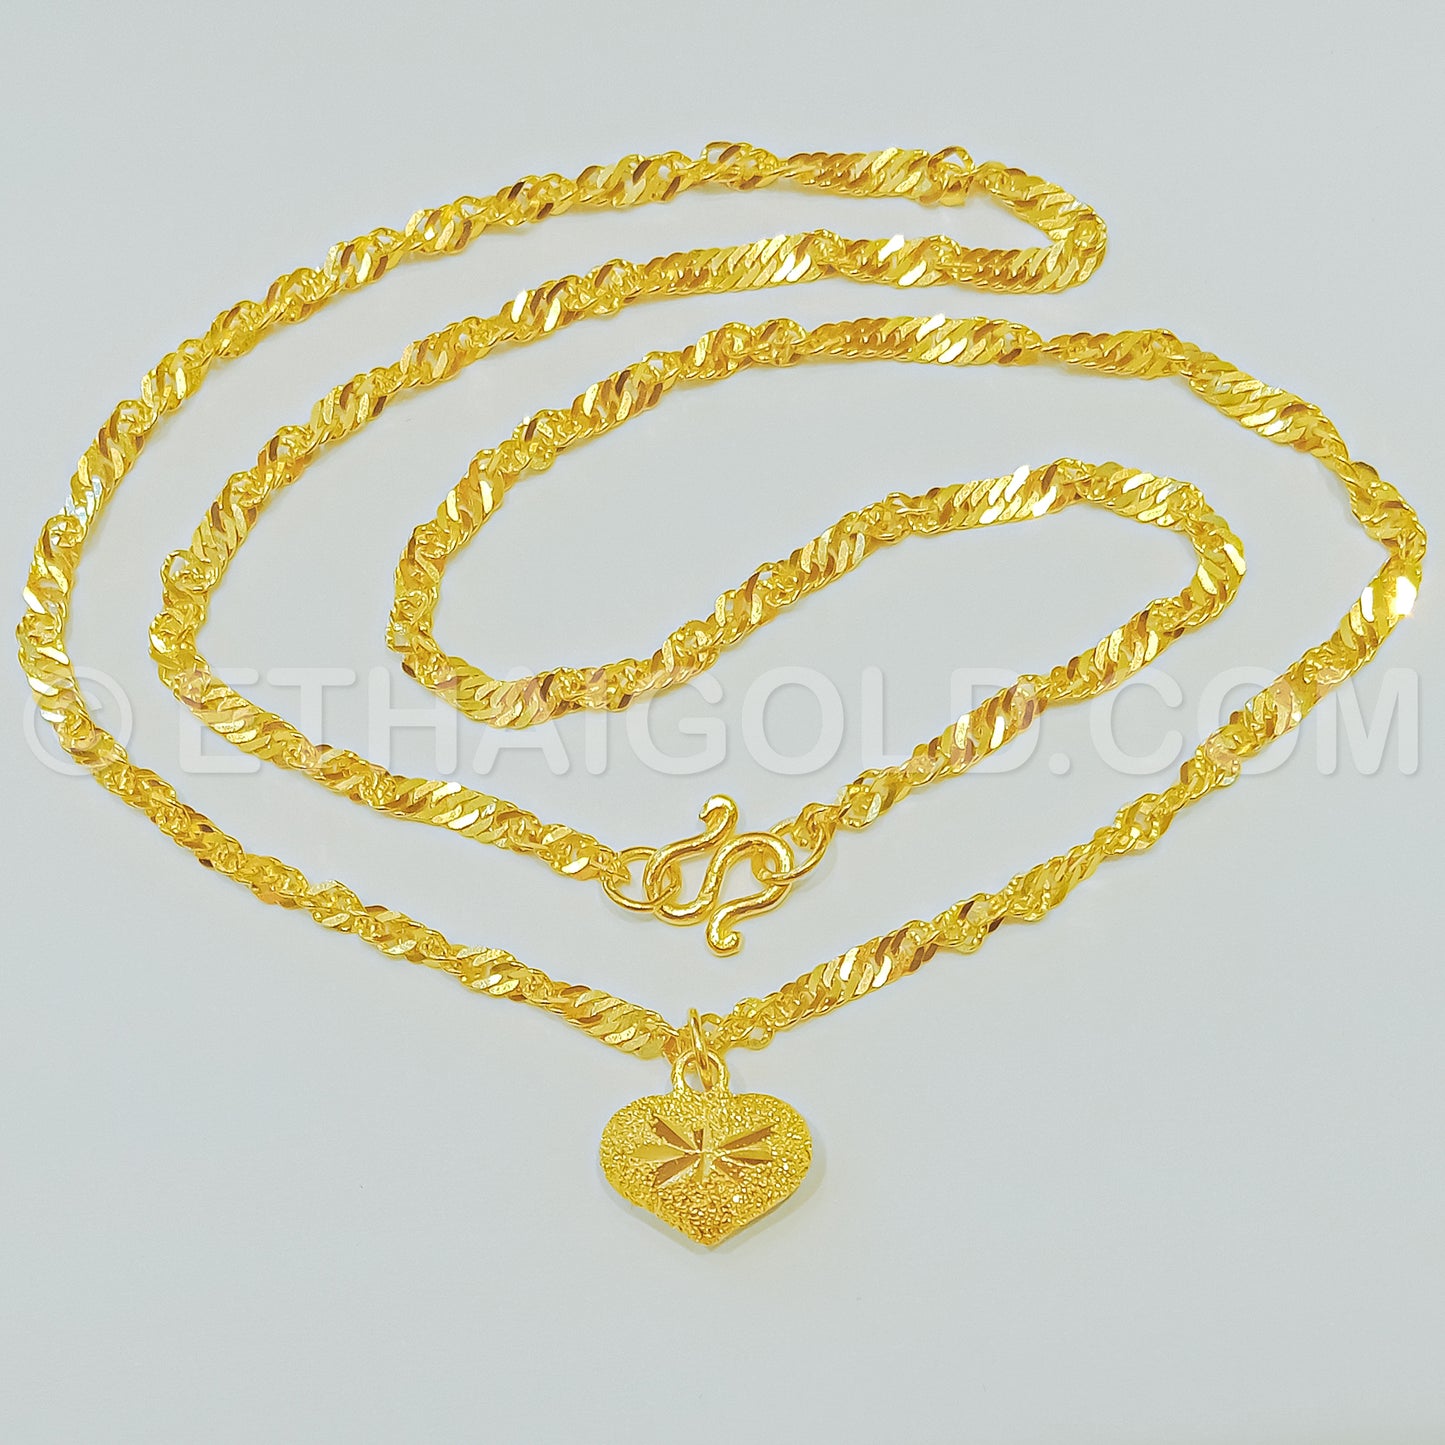 1/4 BAHT POLISHED SOLID SINGAPORE CHAIN HEART NECKLACE IN 23K GOLD (ID: N3601S)